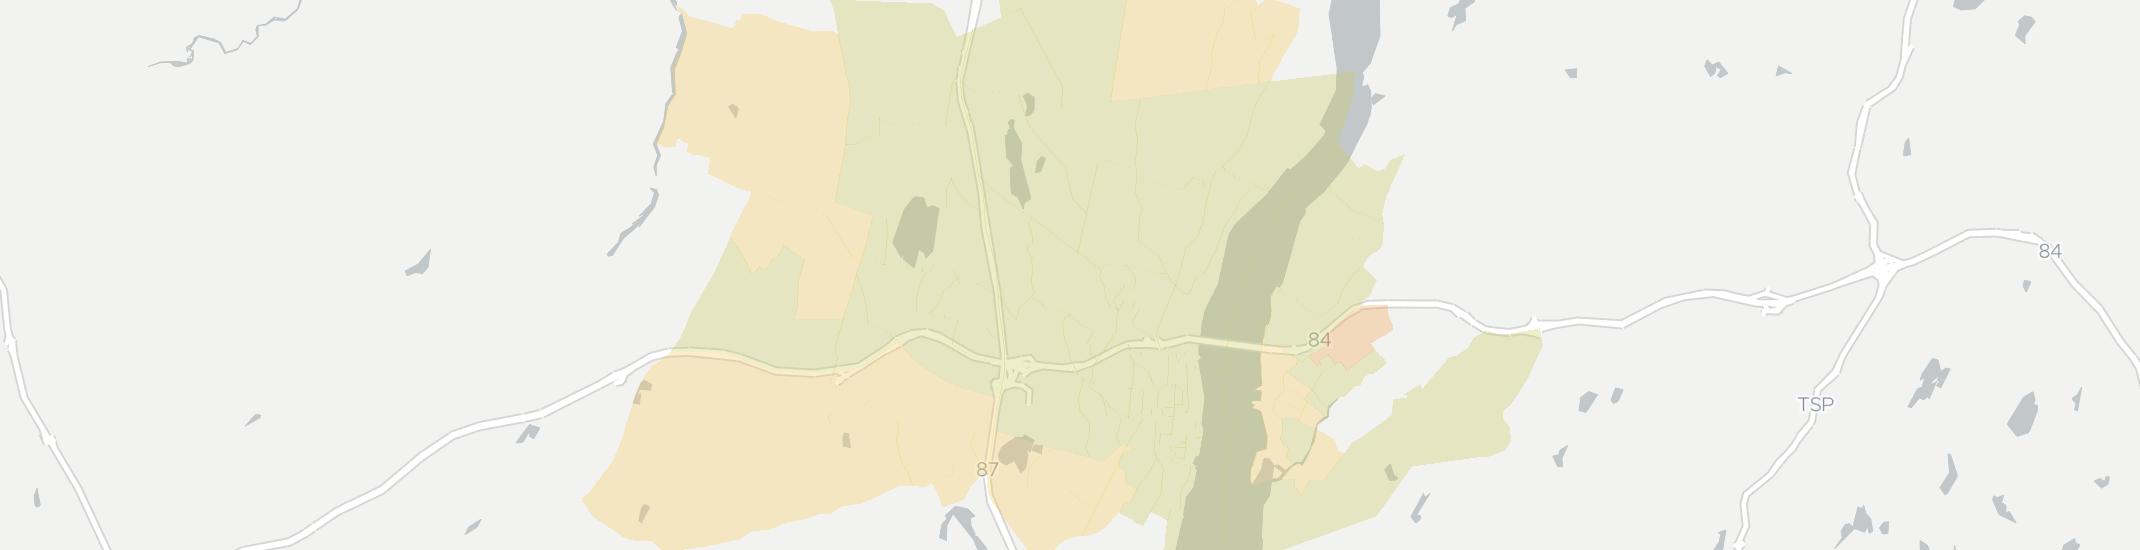 Newburgh Internet Competition Map. Click for interactive map.